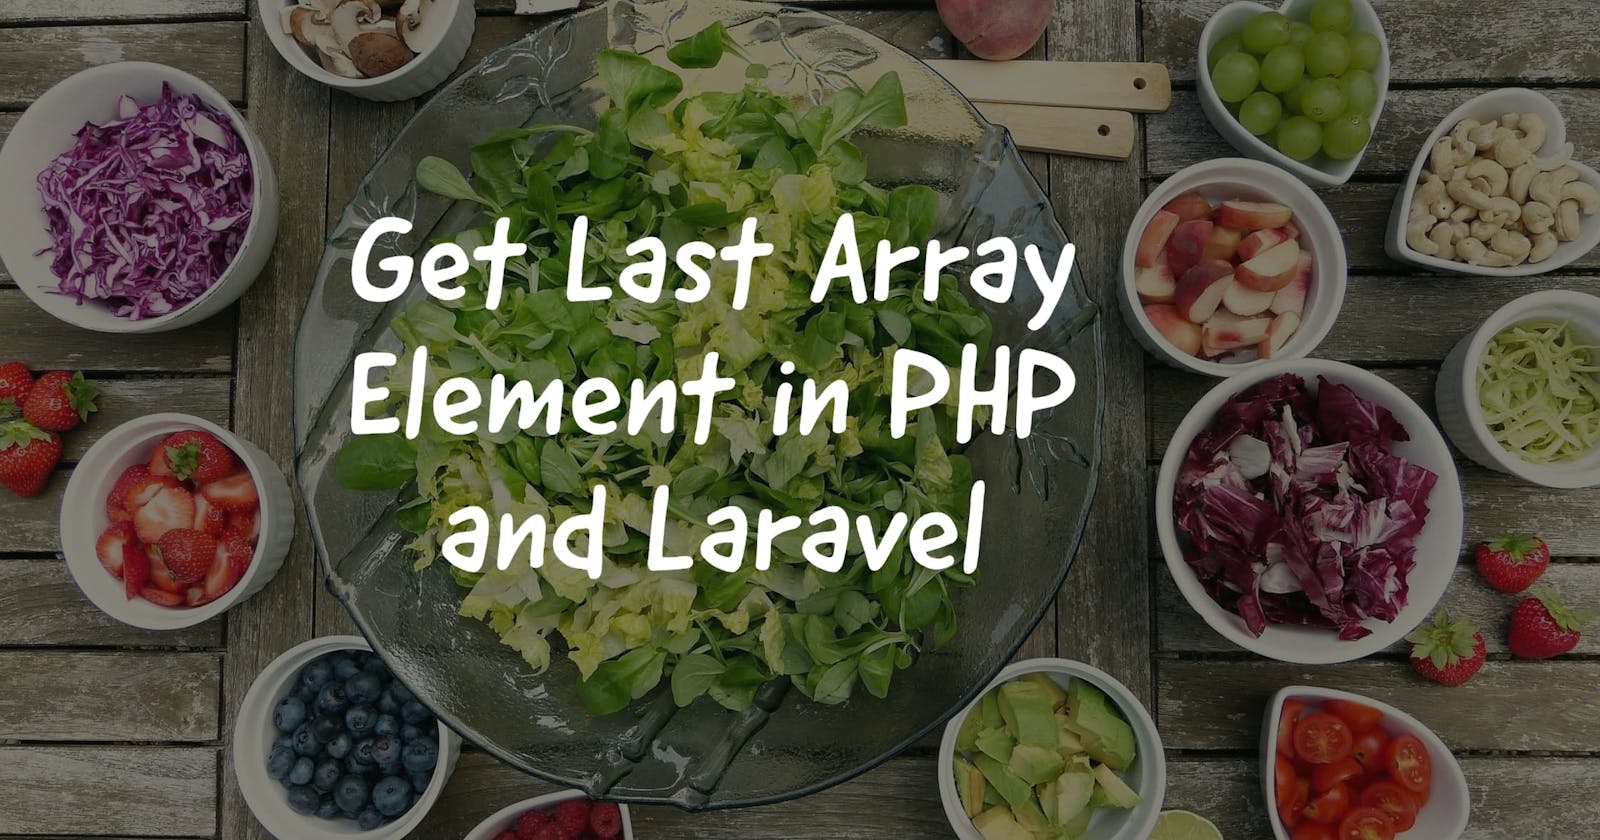 Get Last Array Element in PHP and Laravel